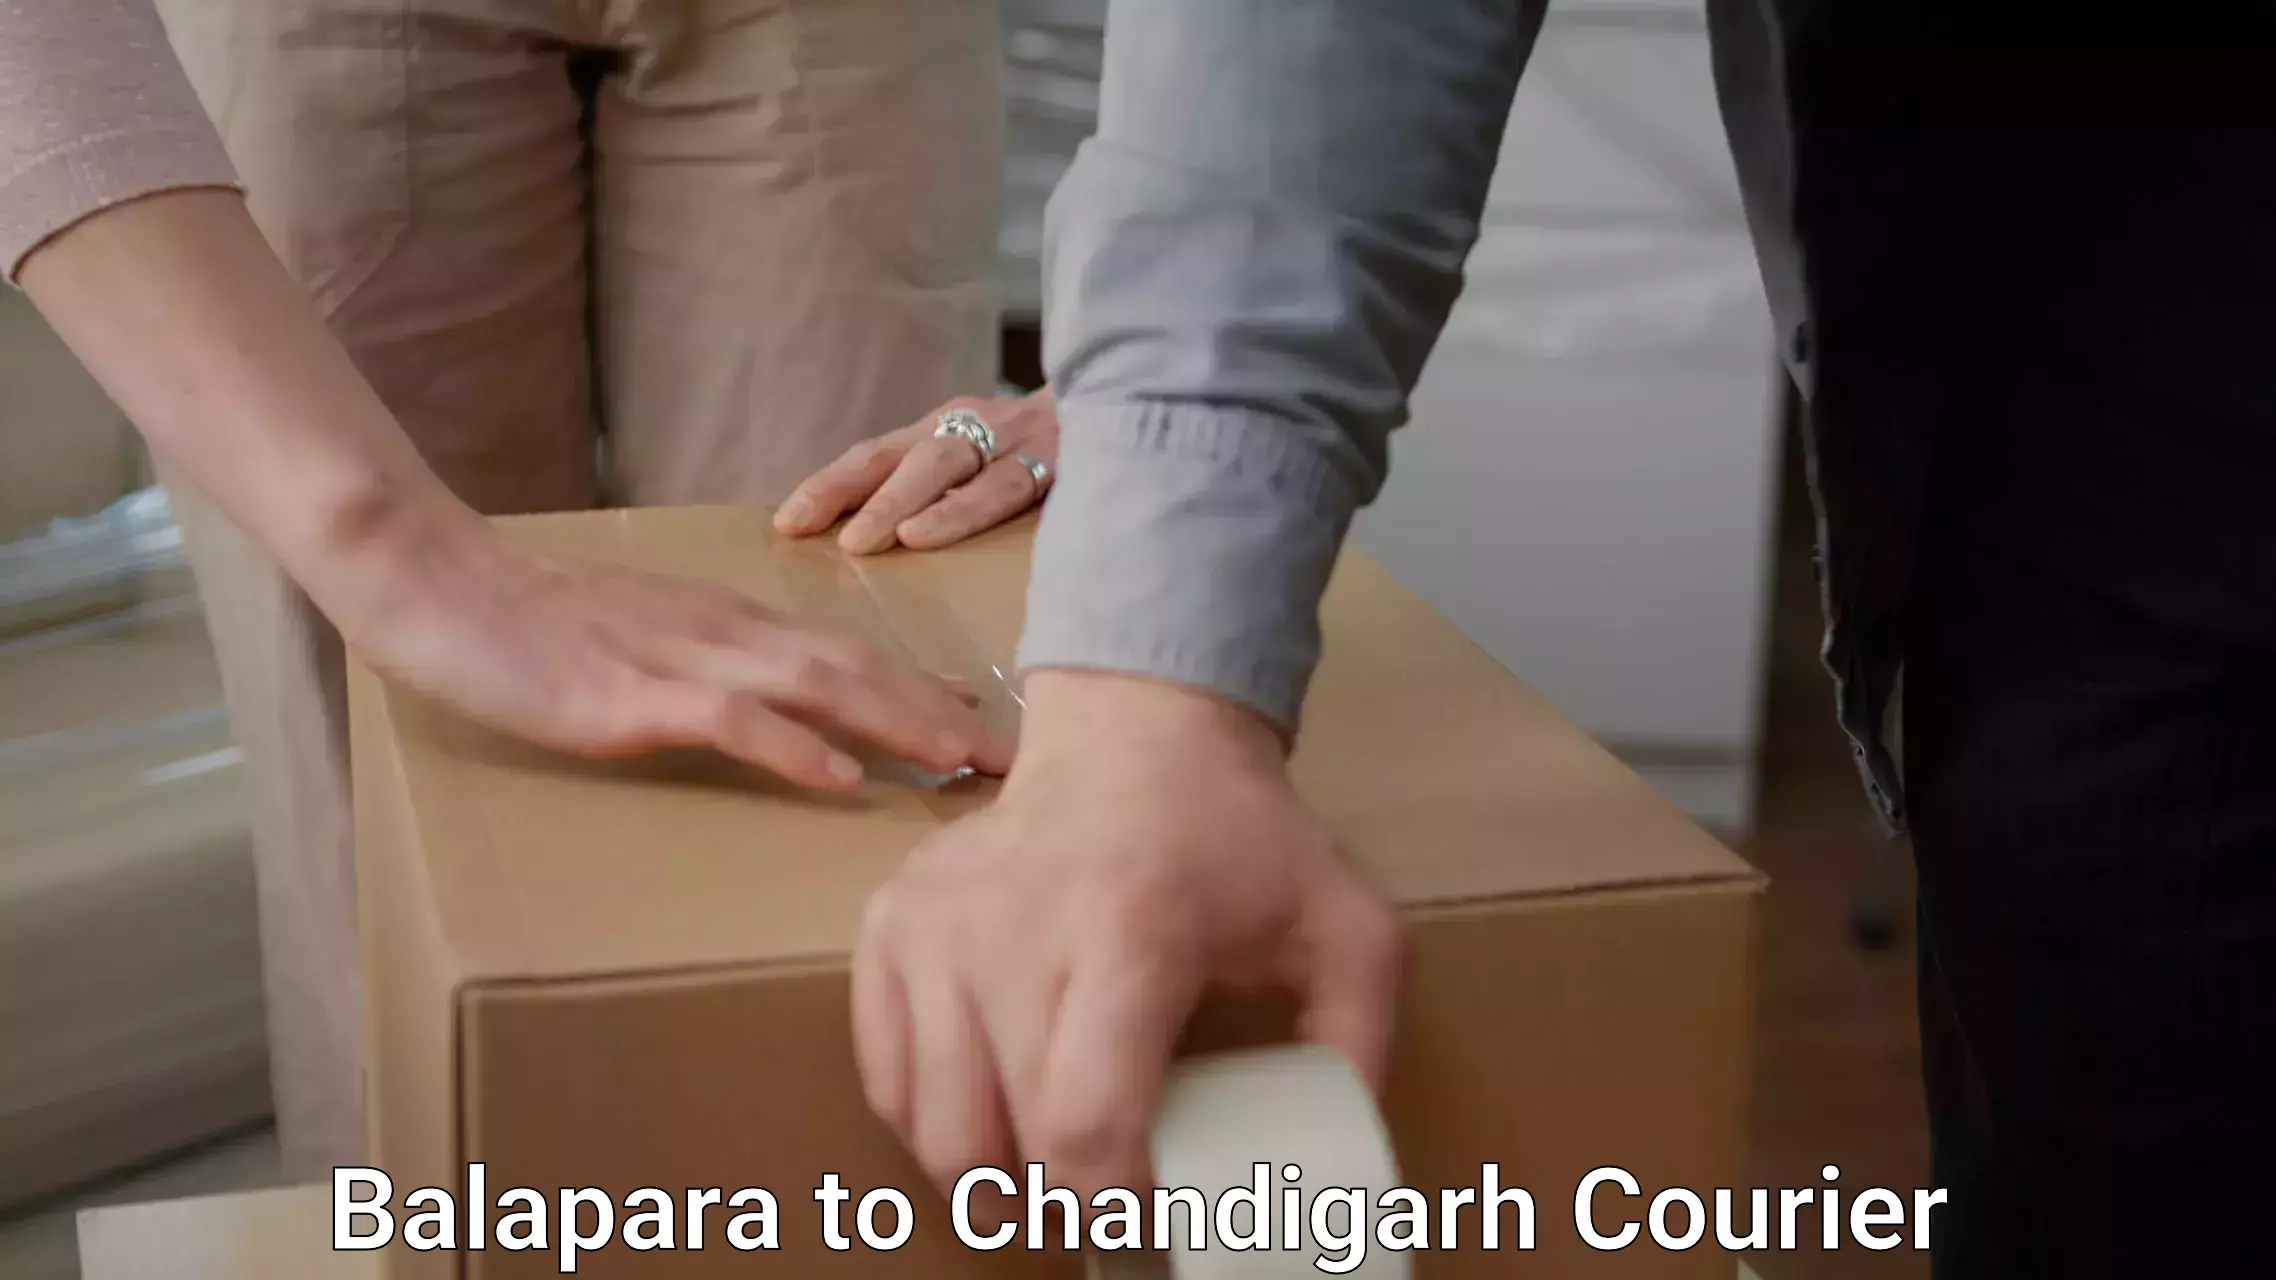 Furniture delivery service Balapara to Chandigarh